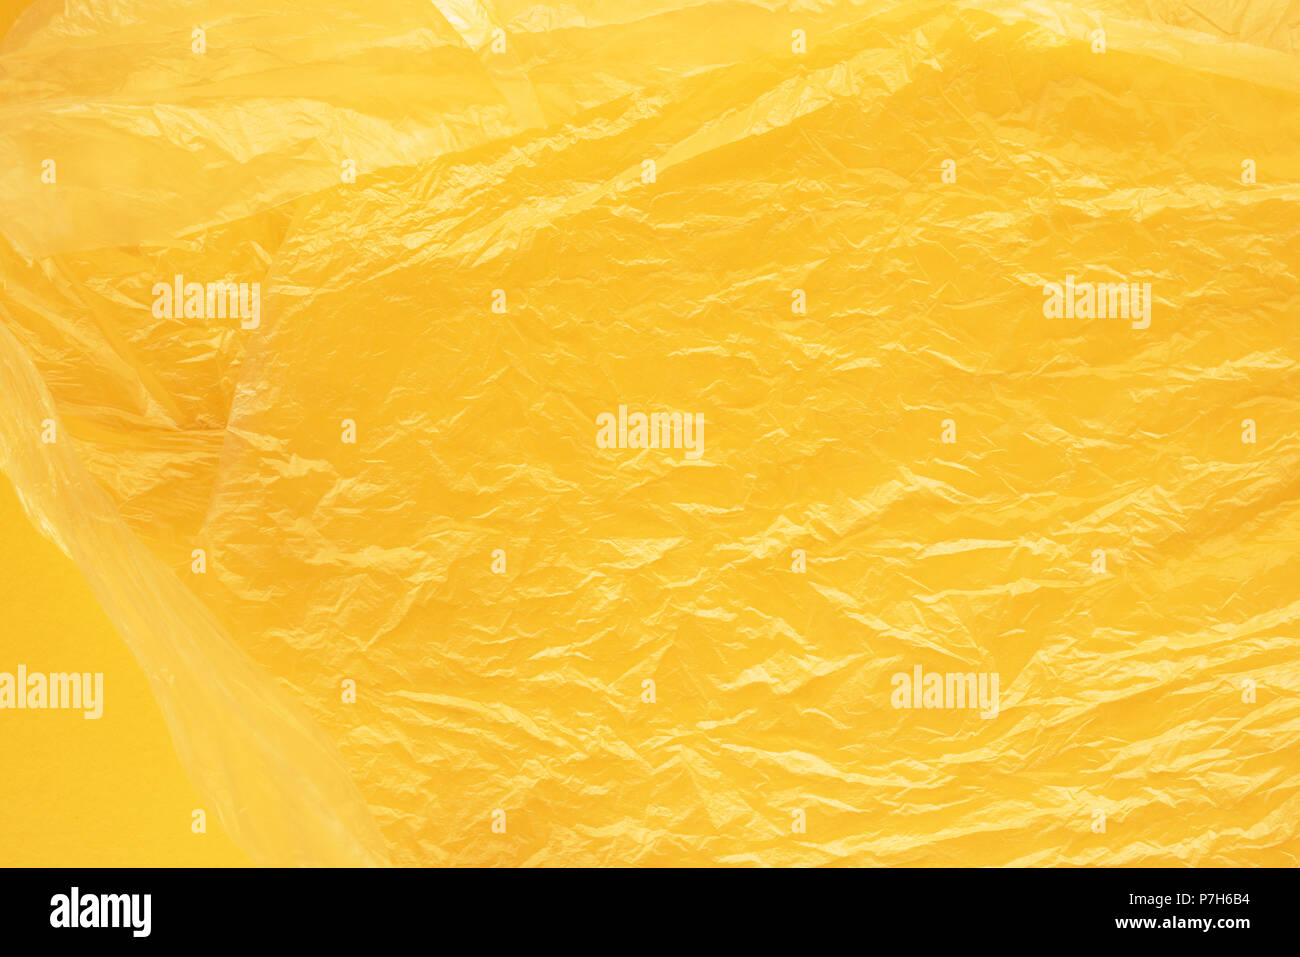 Yellow plastic bag texture as background for environmental pollution concept Stock Photo